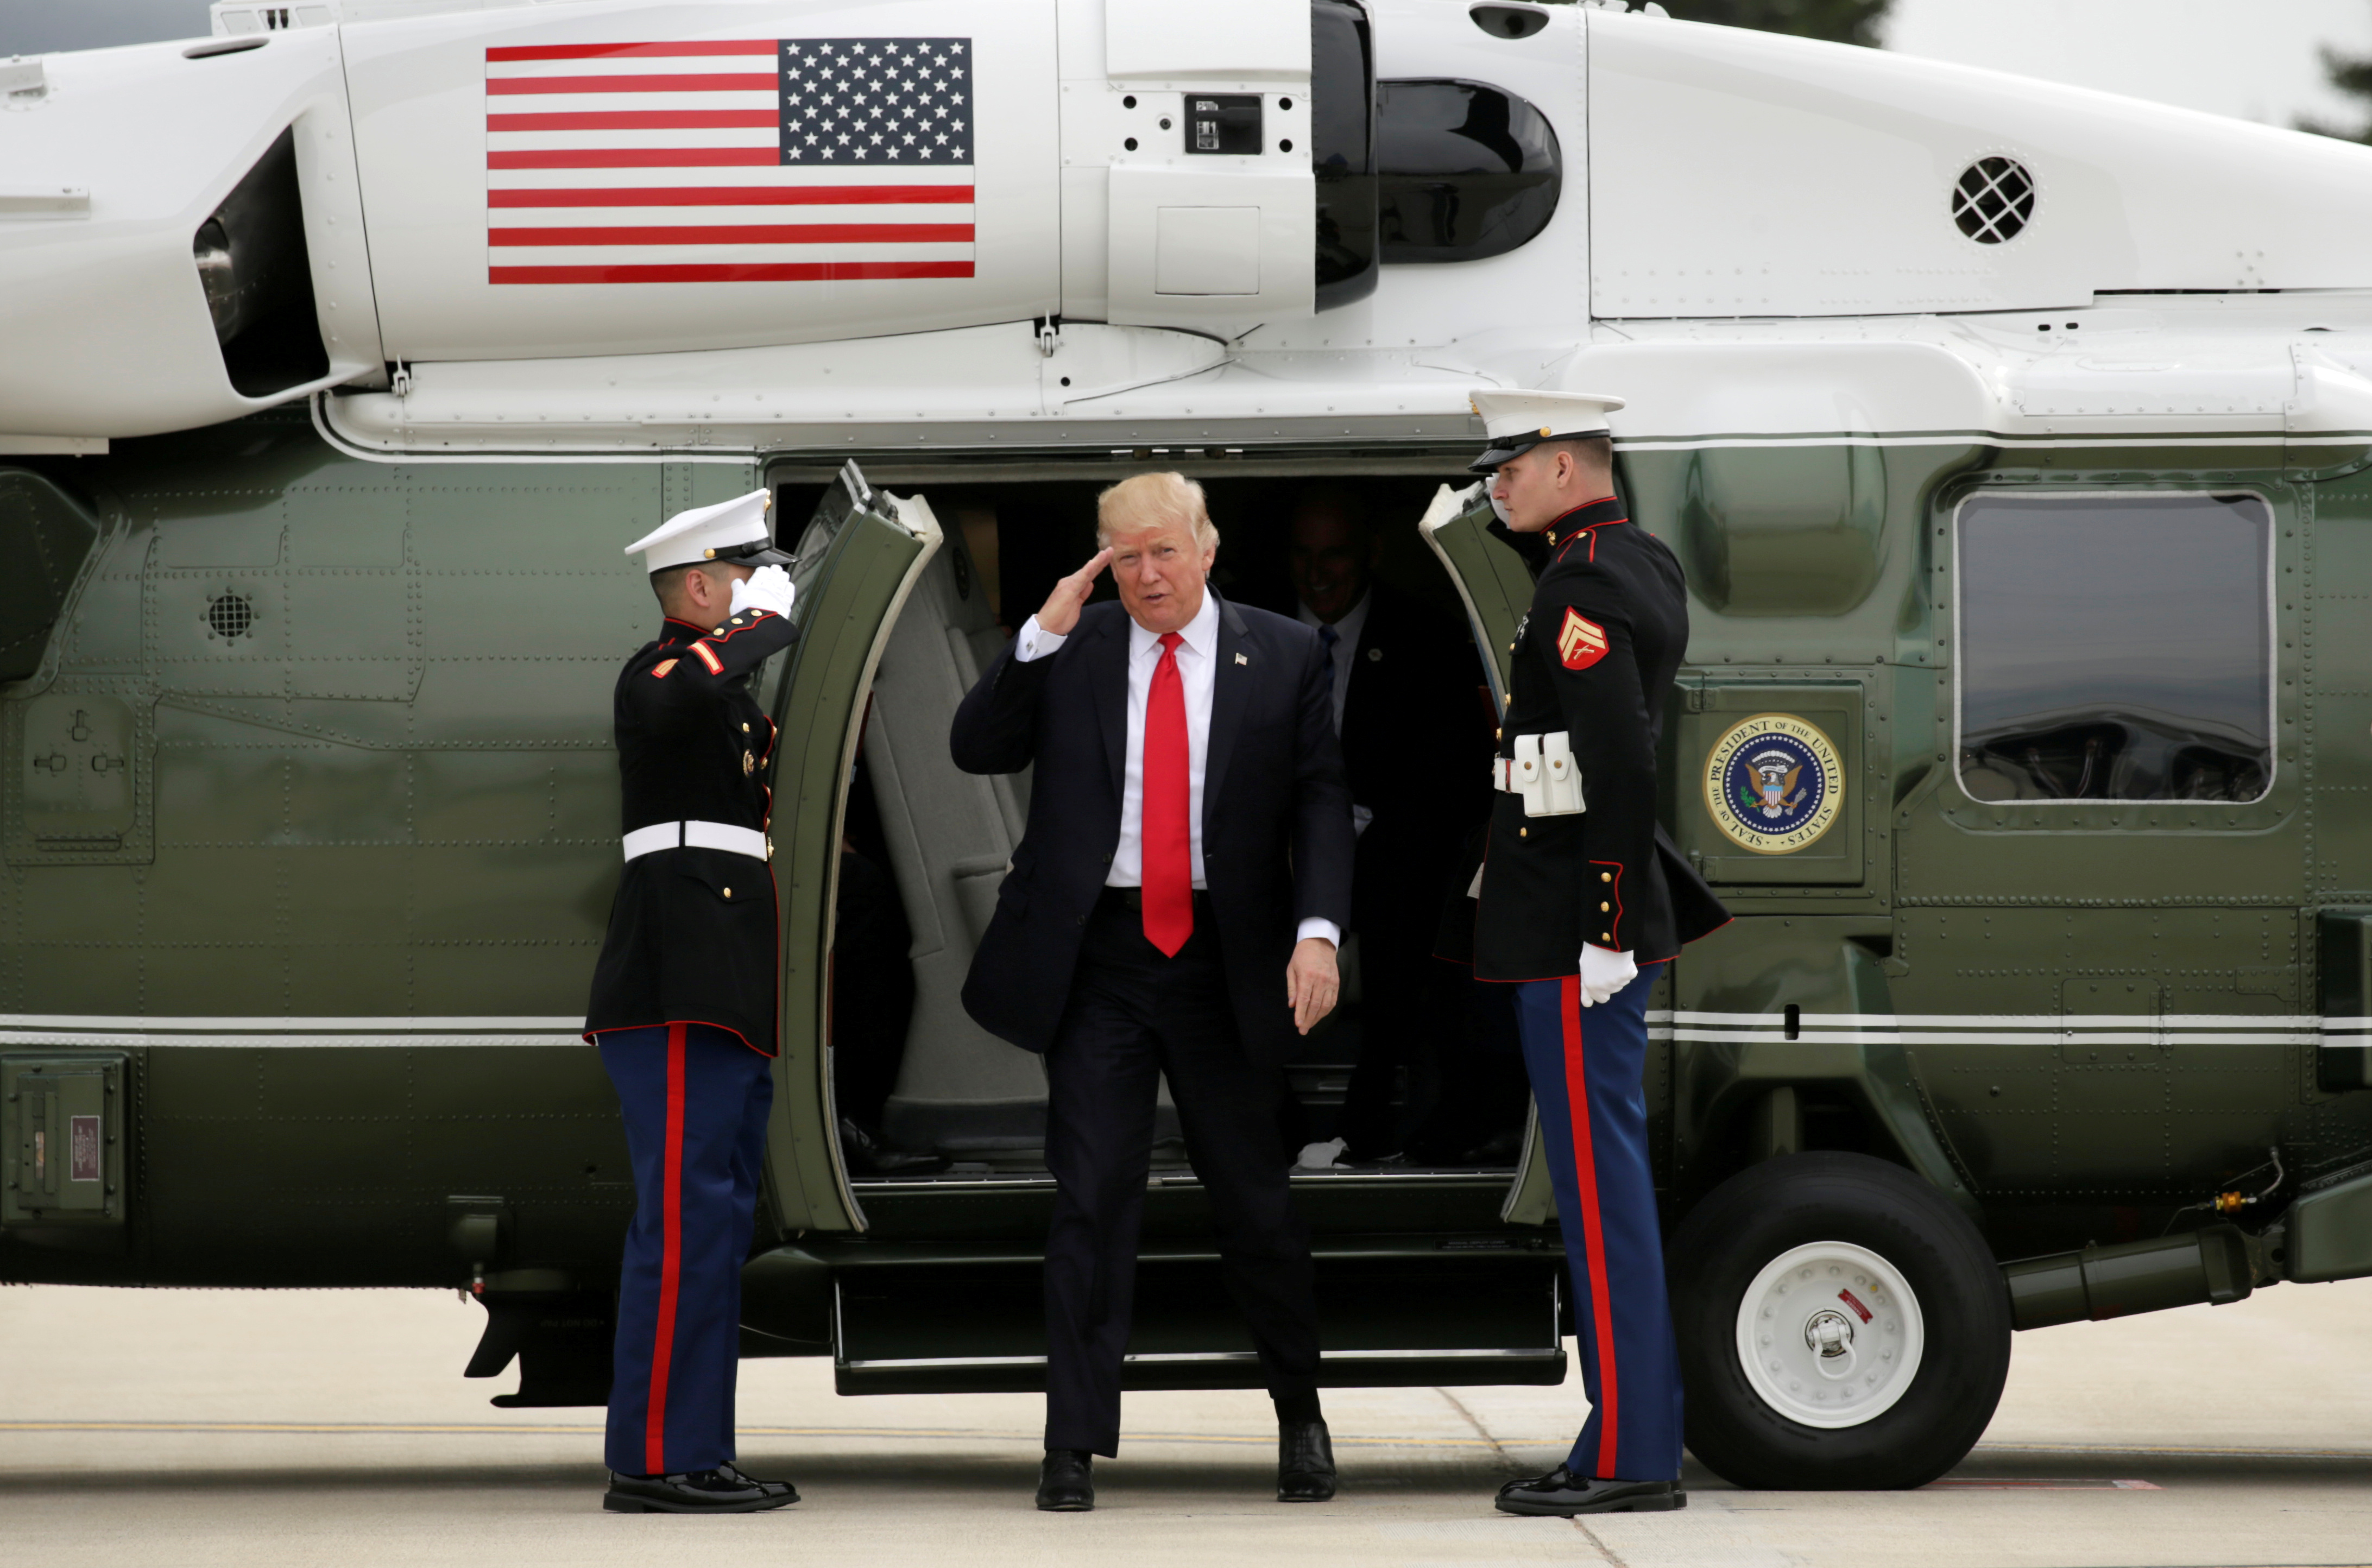 foto : kevin lamarque : 2017-04-19 u.s. president donald trump returns a salute as he steps from marine one to board air force one as he departs milwaukee, wisconsin, u.s., april 18, 2017. reuters/kevin lamarque tpx images of the day photo: / reuters / tt / kod 72000